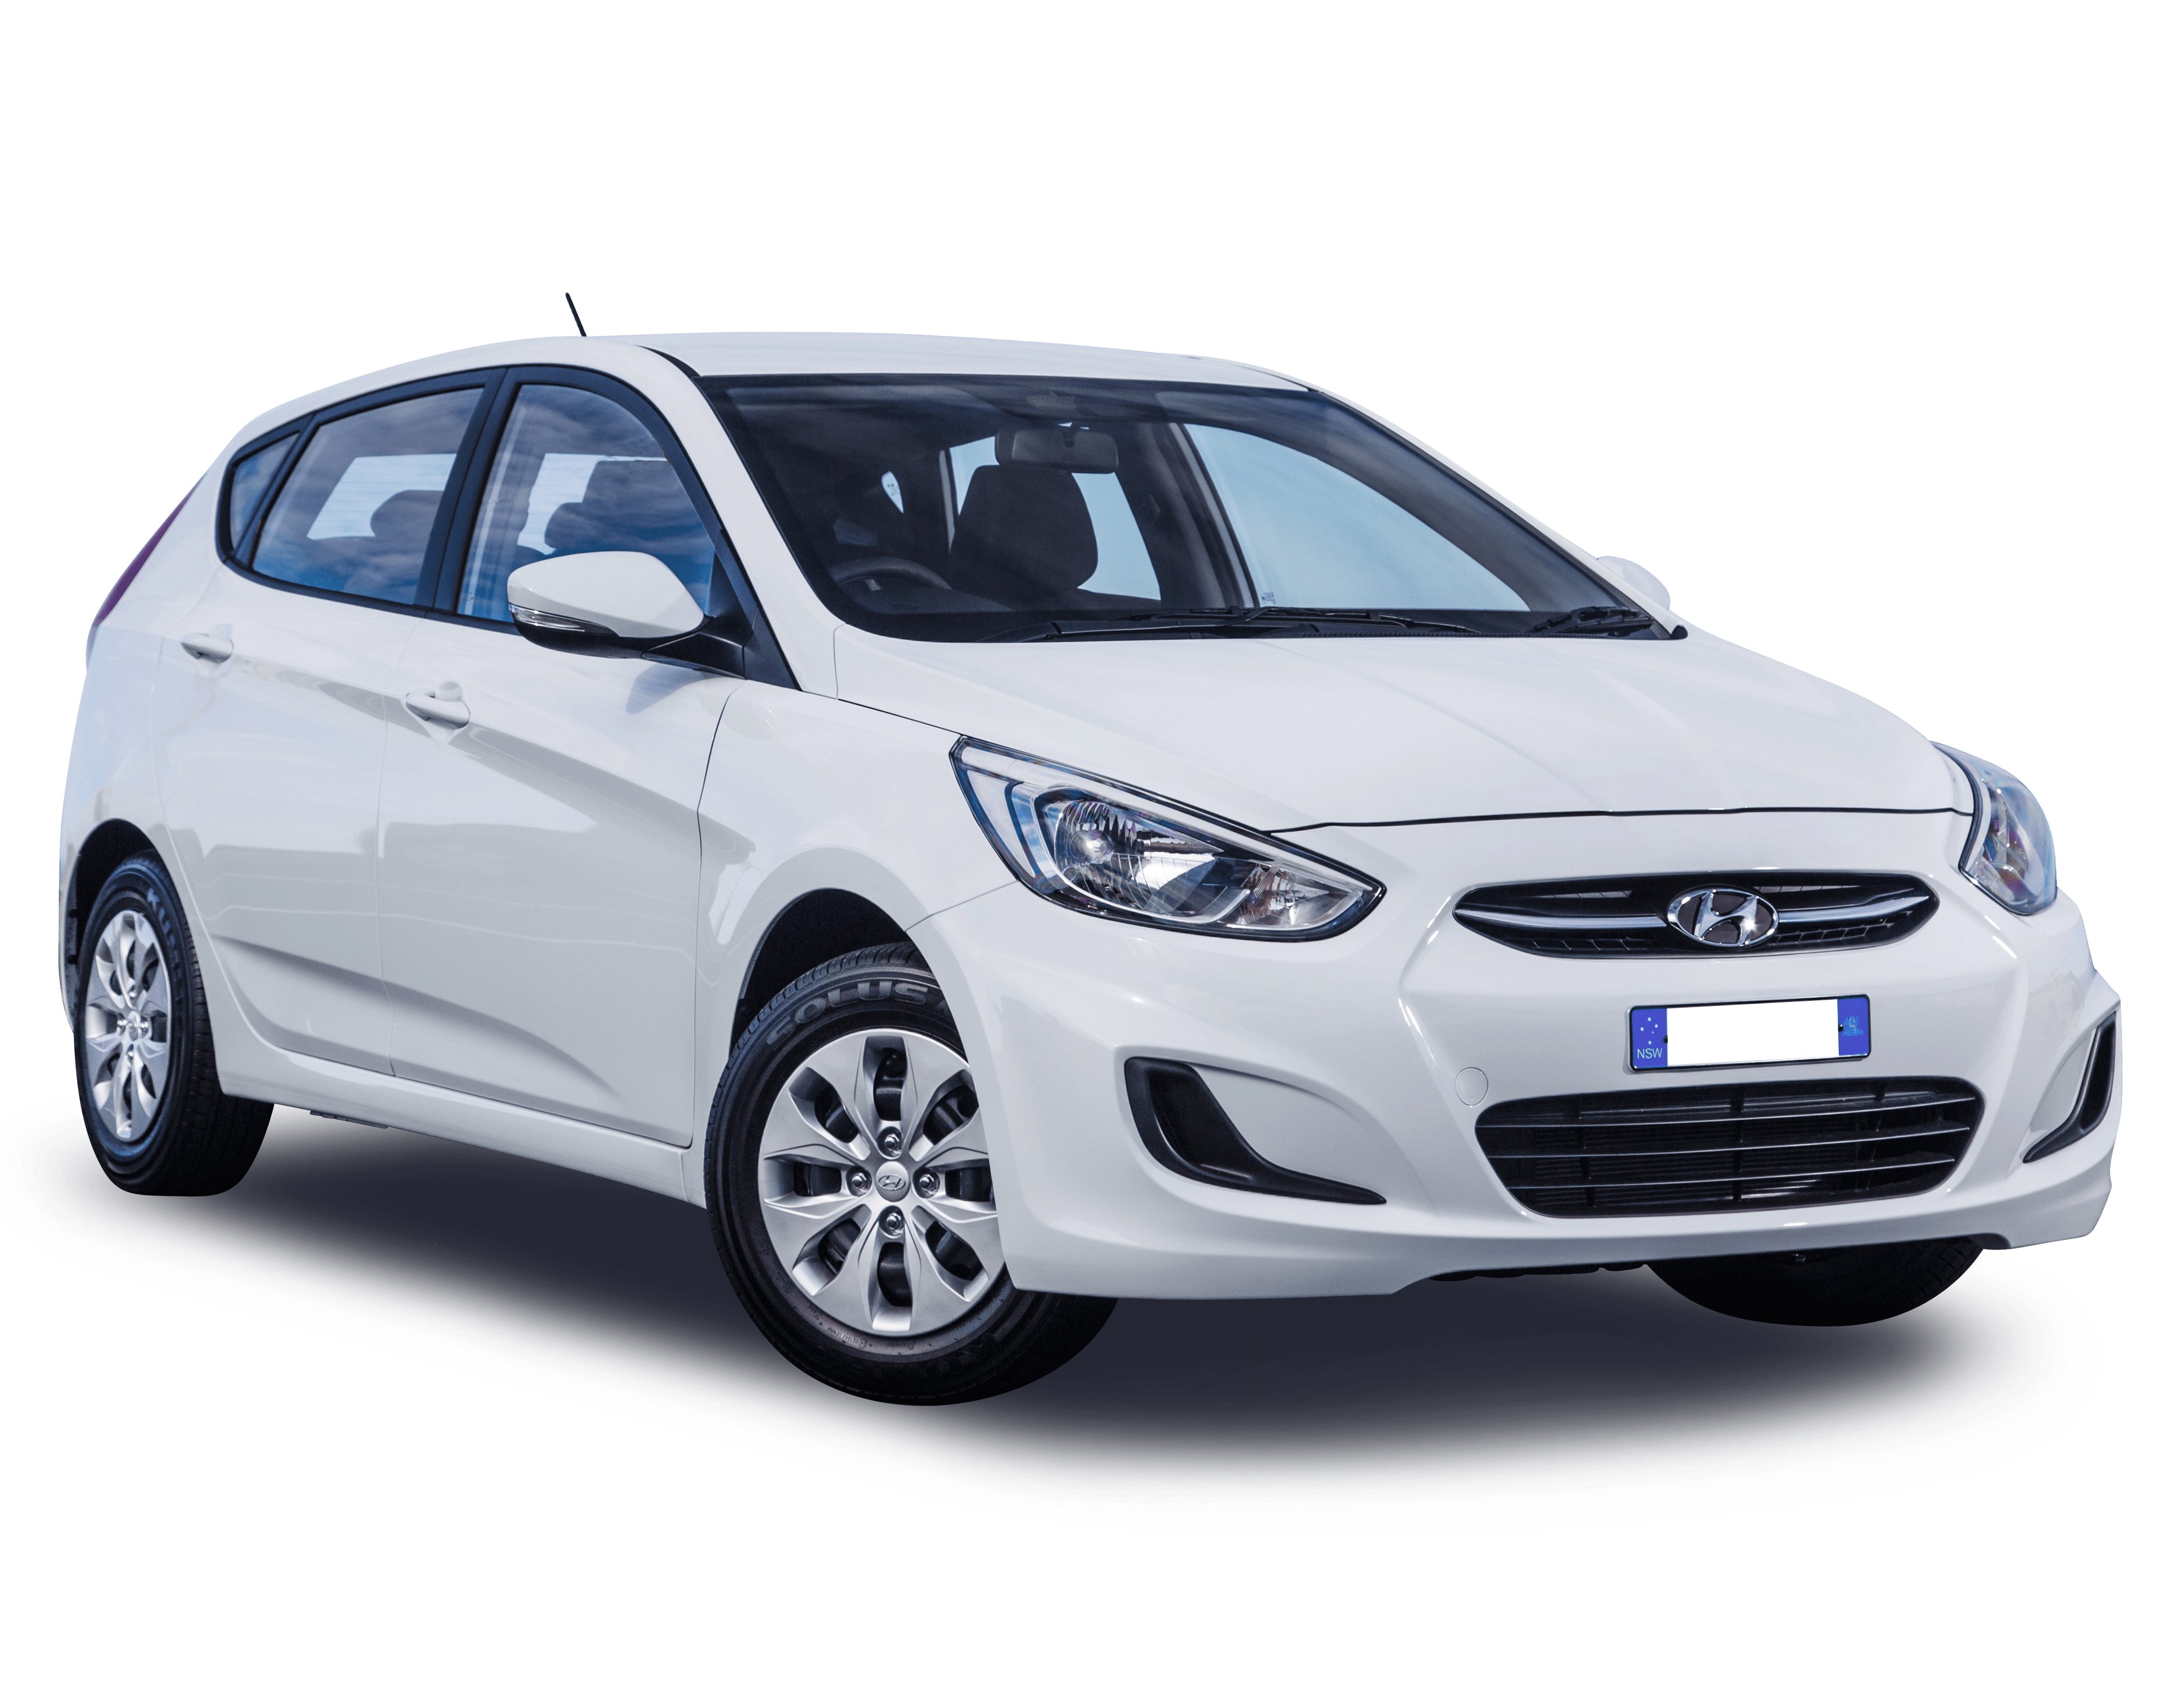 Hyundai Accent accessories restyling